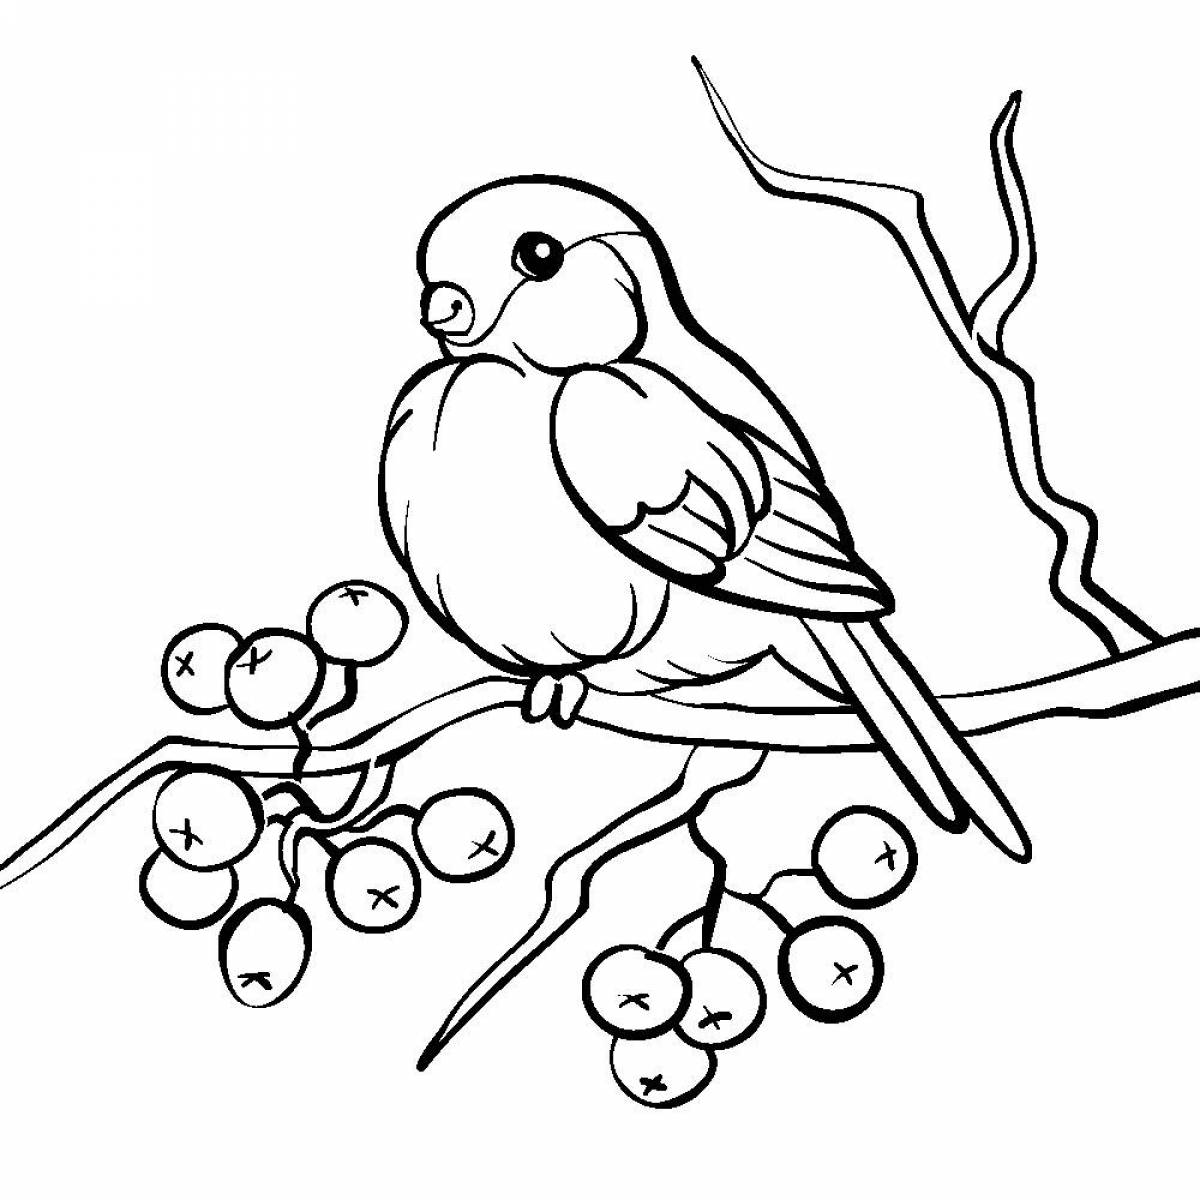 Bullfinch on a branch coloring page